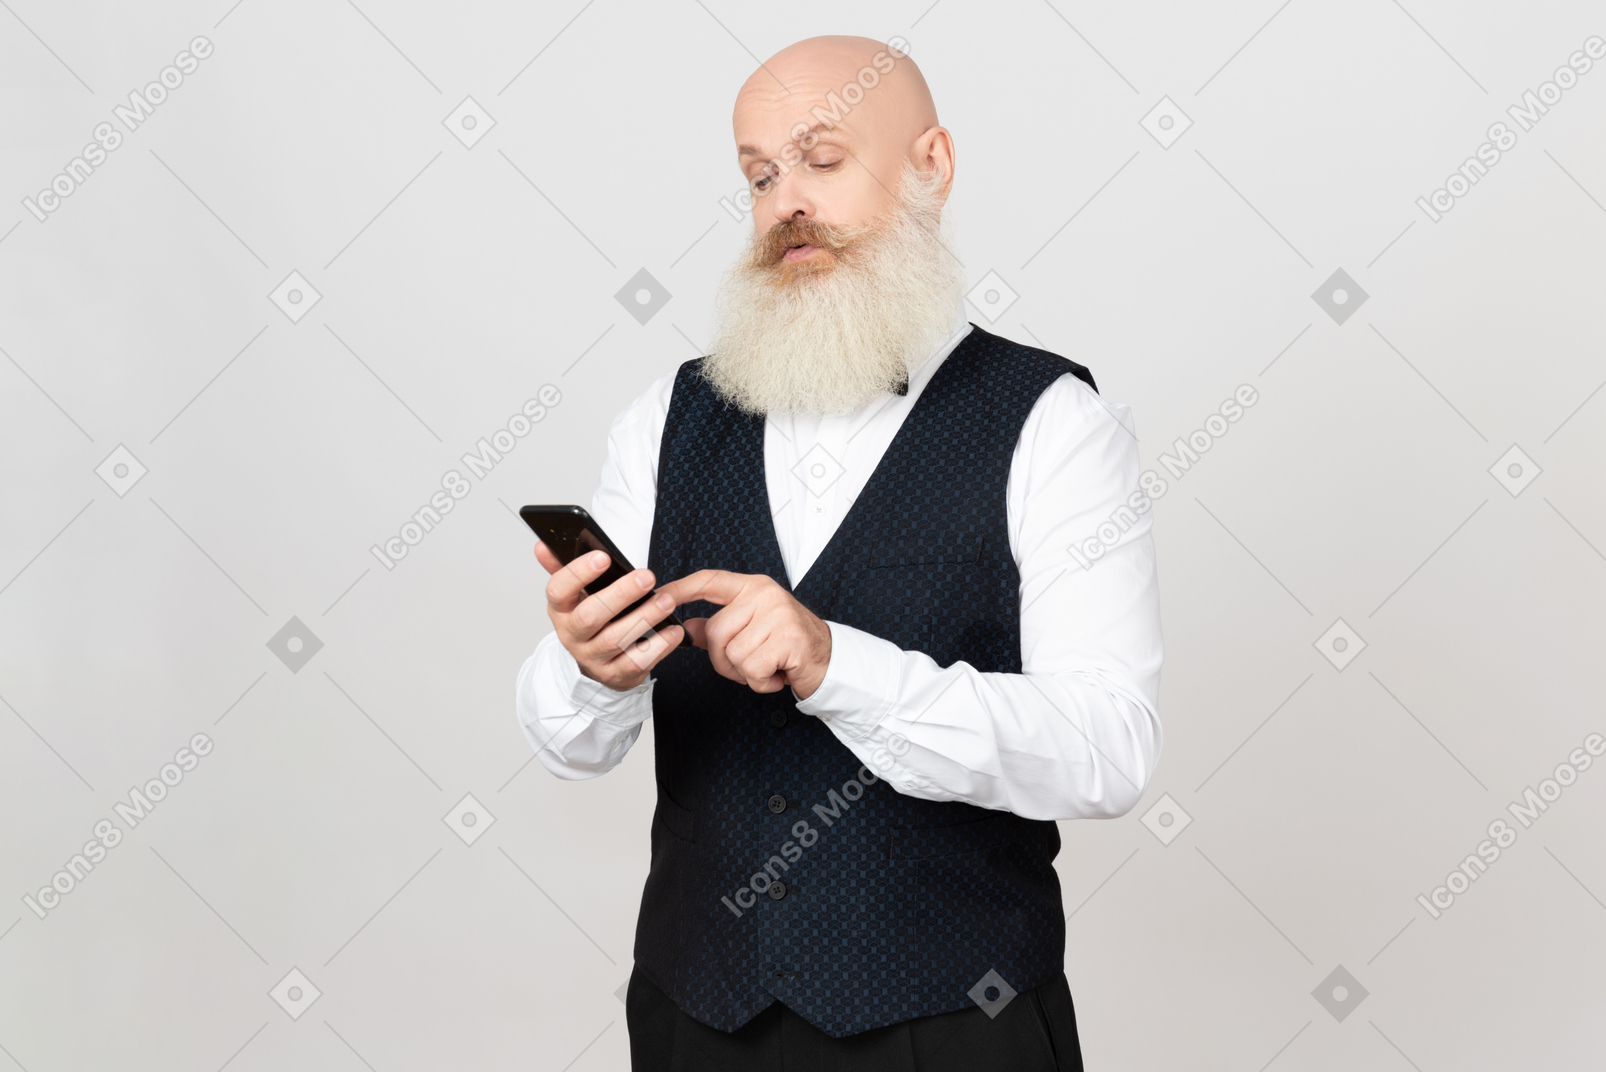 Aged man looking attentively on the phone